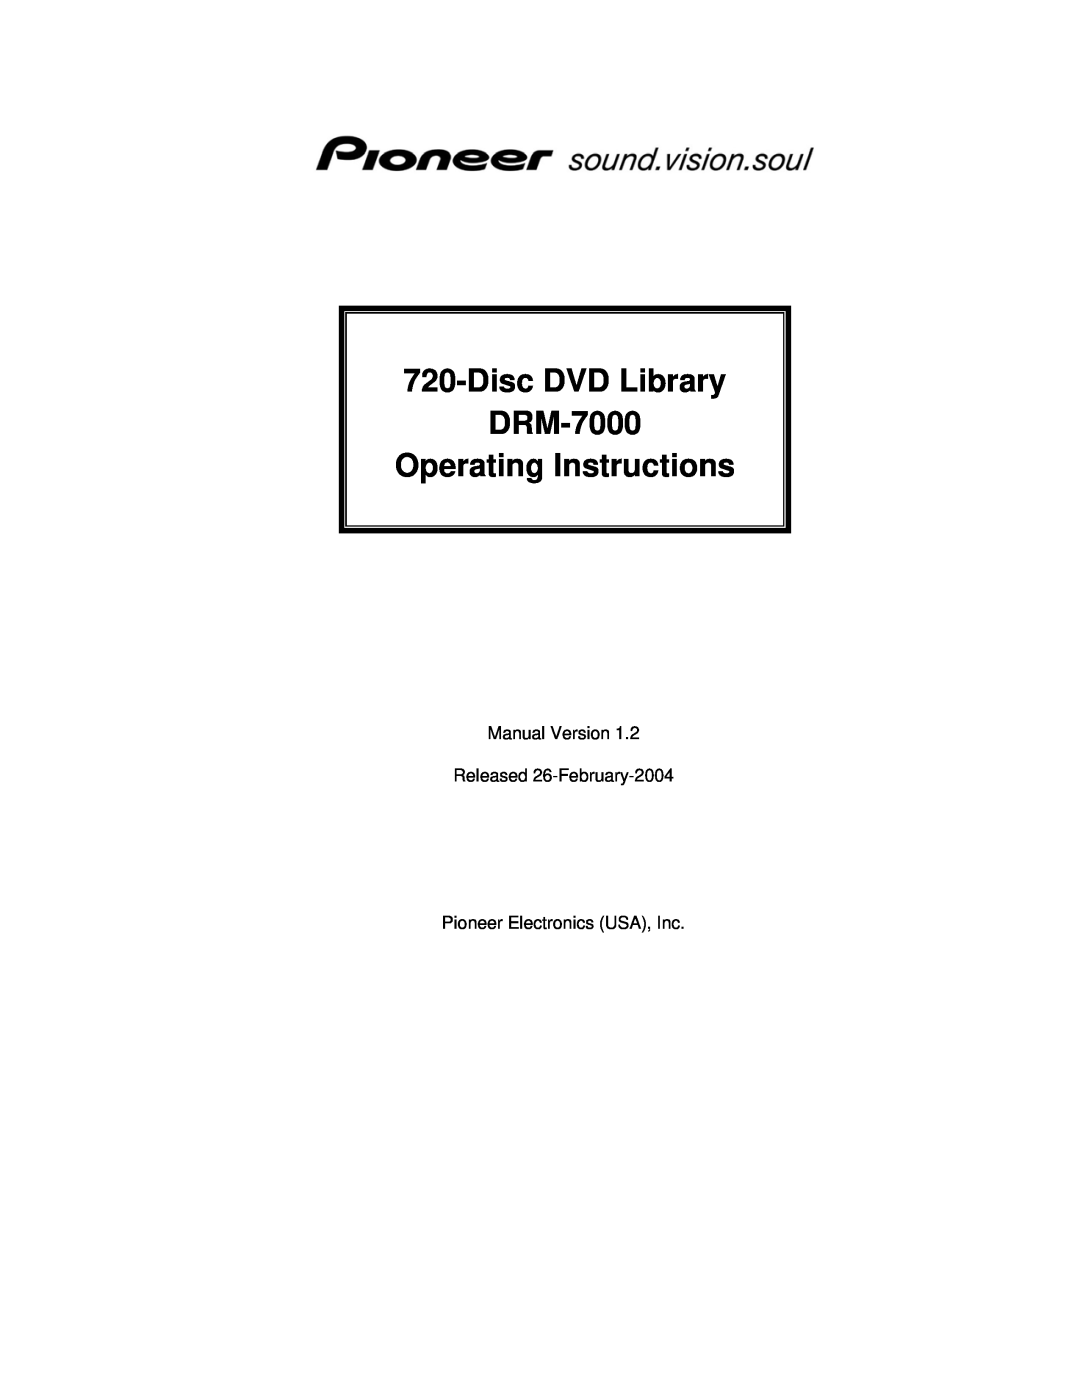 Pioneer operating instructions DiscDVD Library DRM-7000, Operating Instructions, Pioneer Electronics USA, Inc 